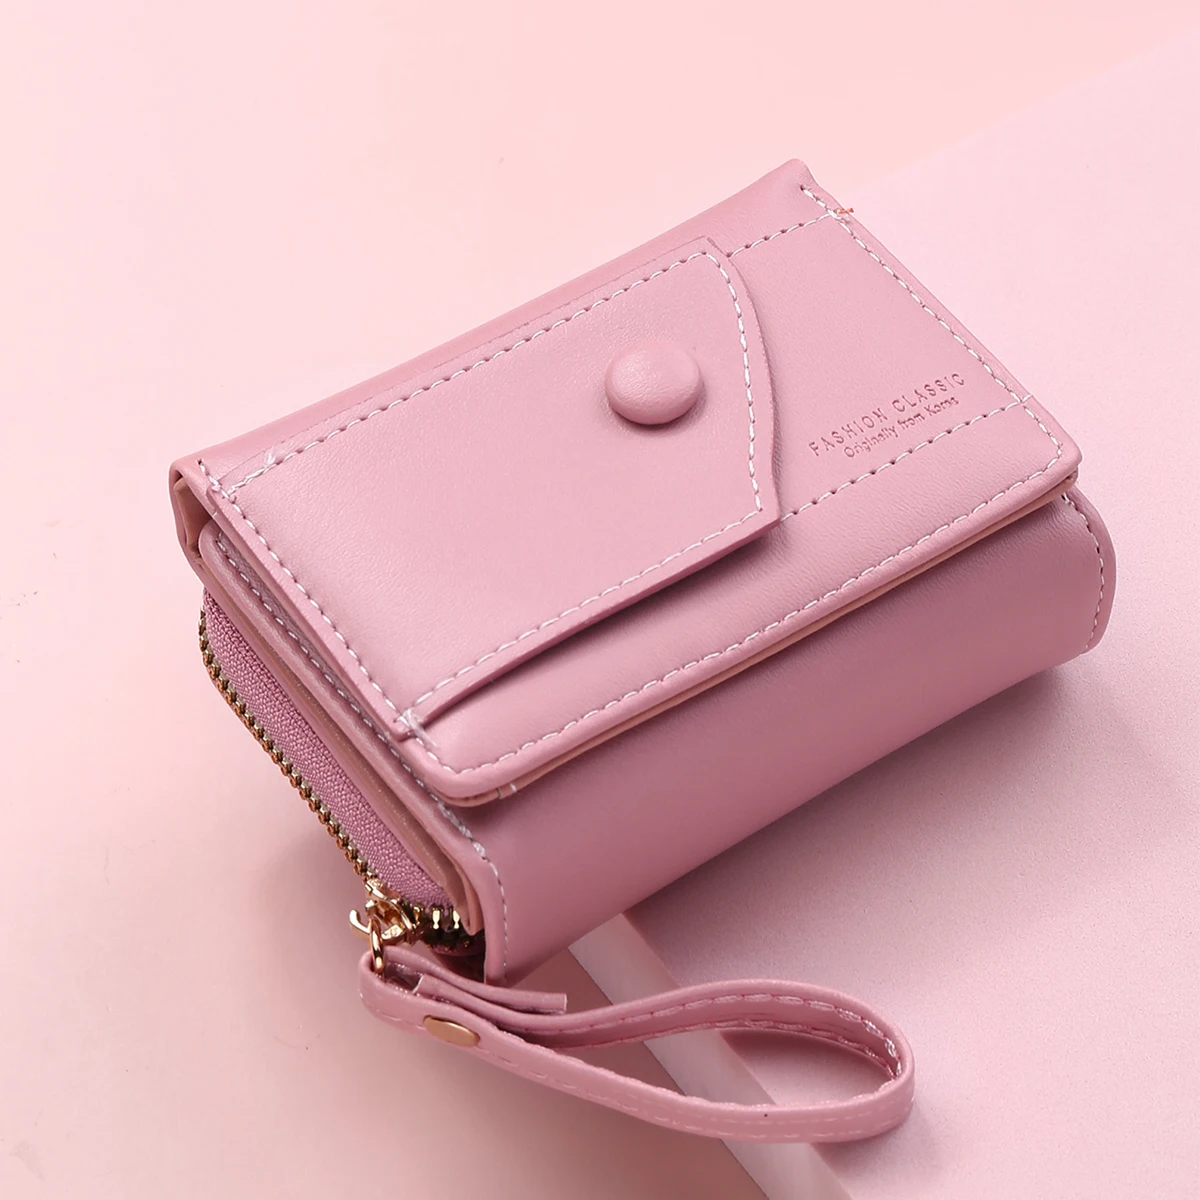 Stylish womens clutch wallet purse for girls pink pu leather ladies hand  mobile purse WRCL P